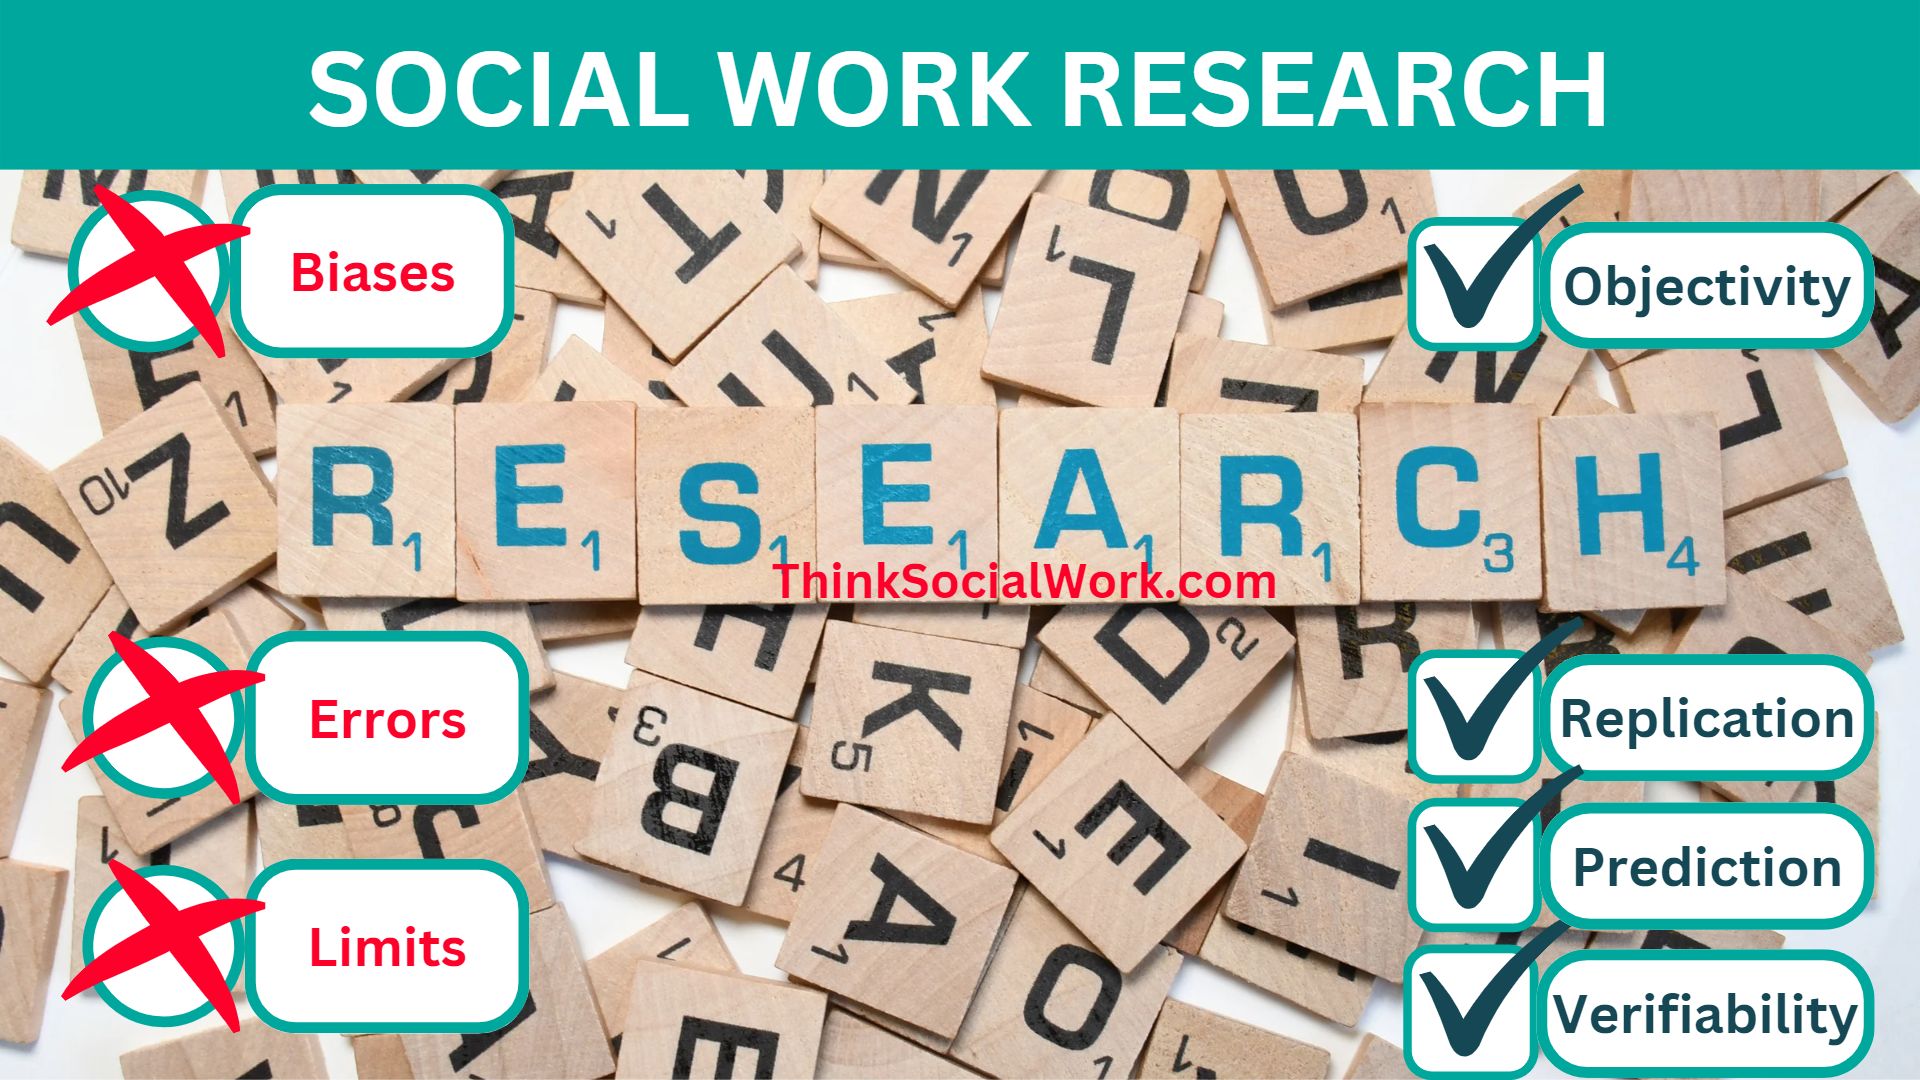 master of social work by research